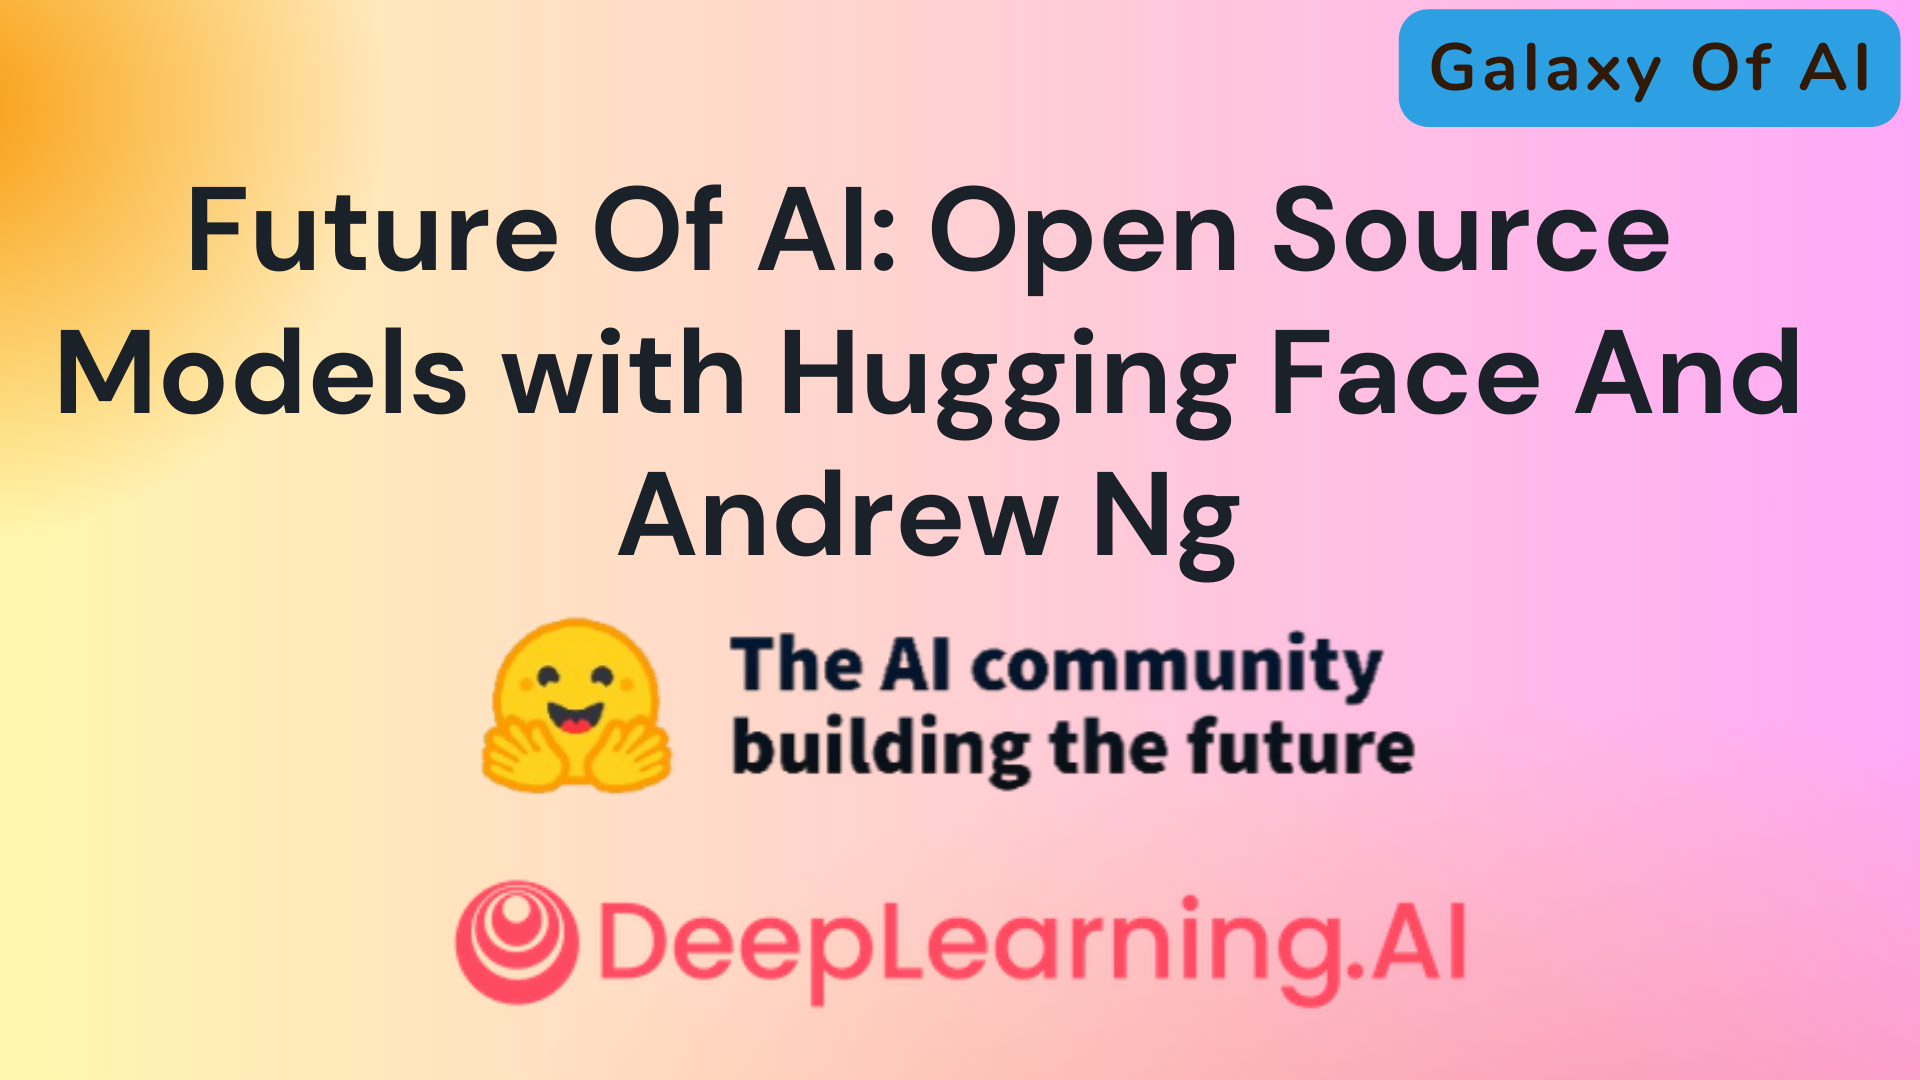 Future Of AI: Open Source Models with Hugging Face And Andrew Ng